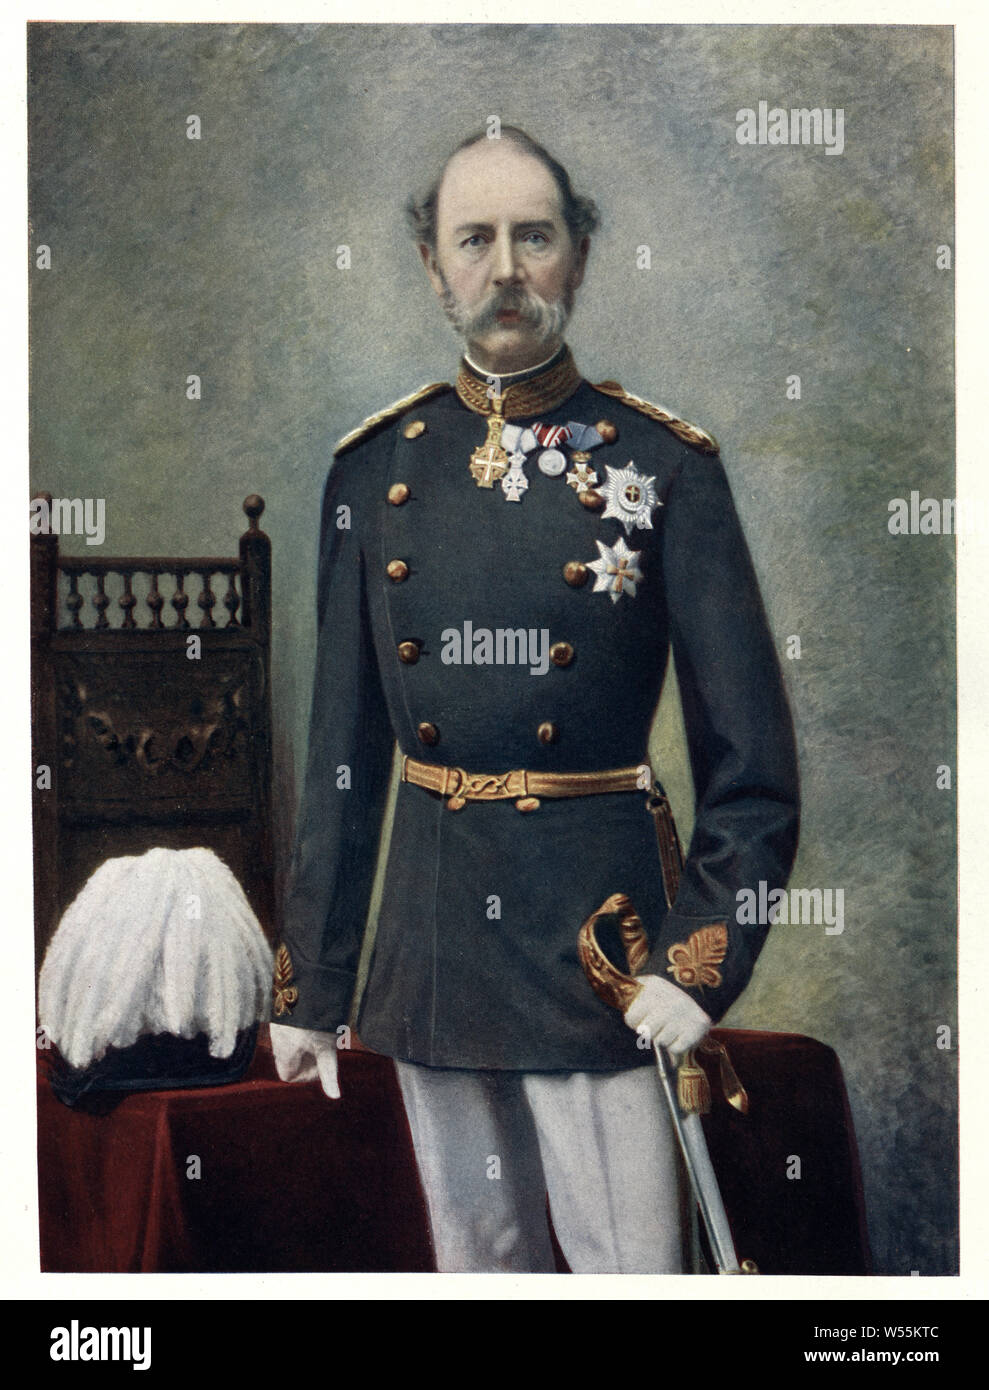 Christian IX (8 April 1818 – 29 January 1906) was King of Denmark from 1863 until his death in 1906. Stock Photo